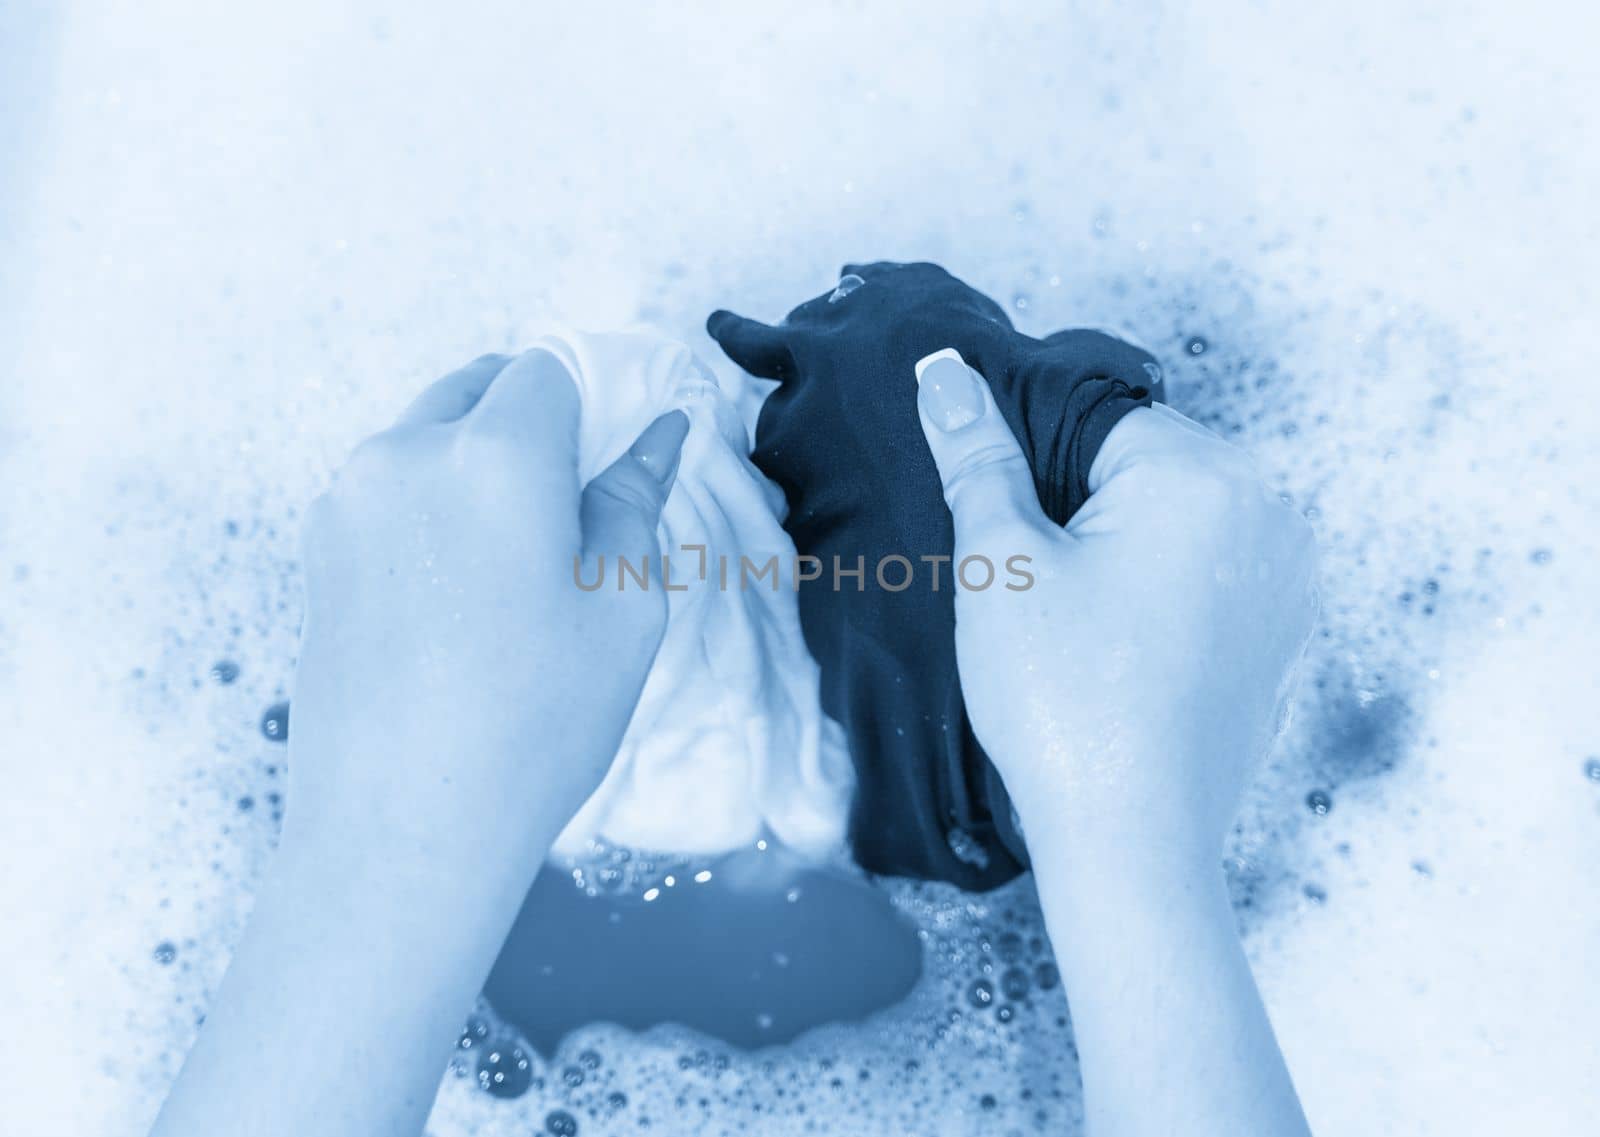 Hands holding black and white clothes while handwash in sink by Mariakray